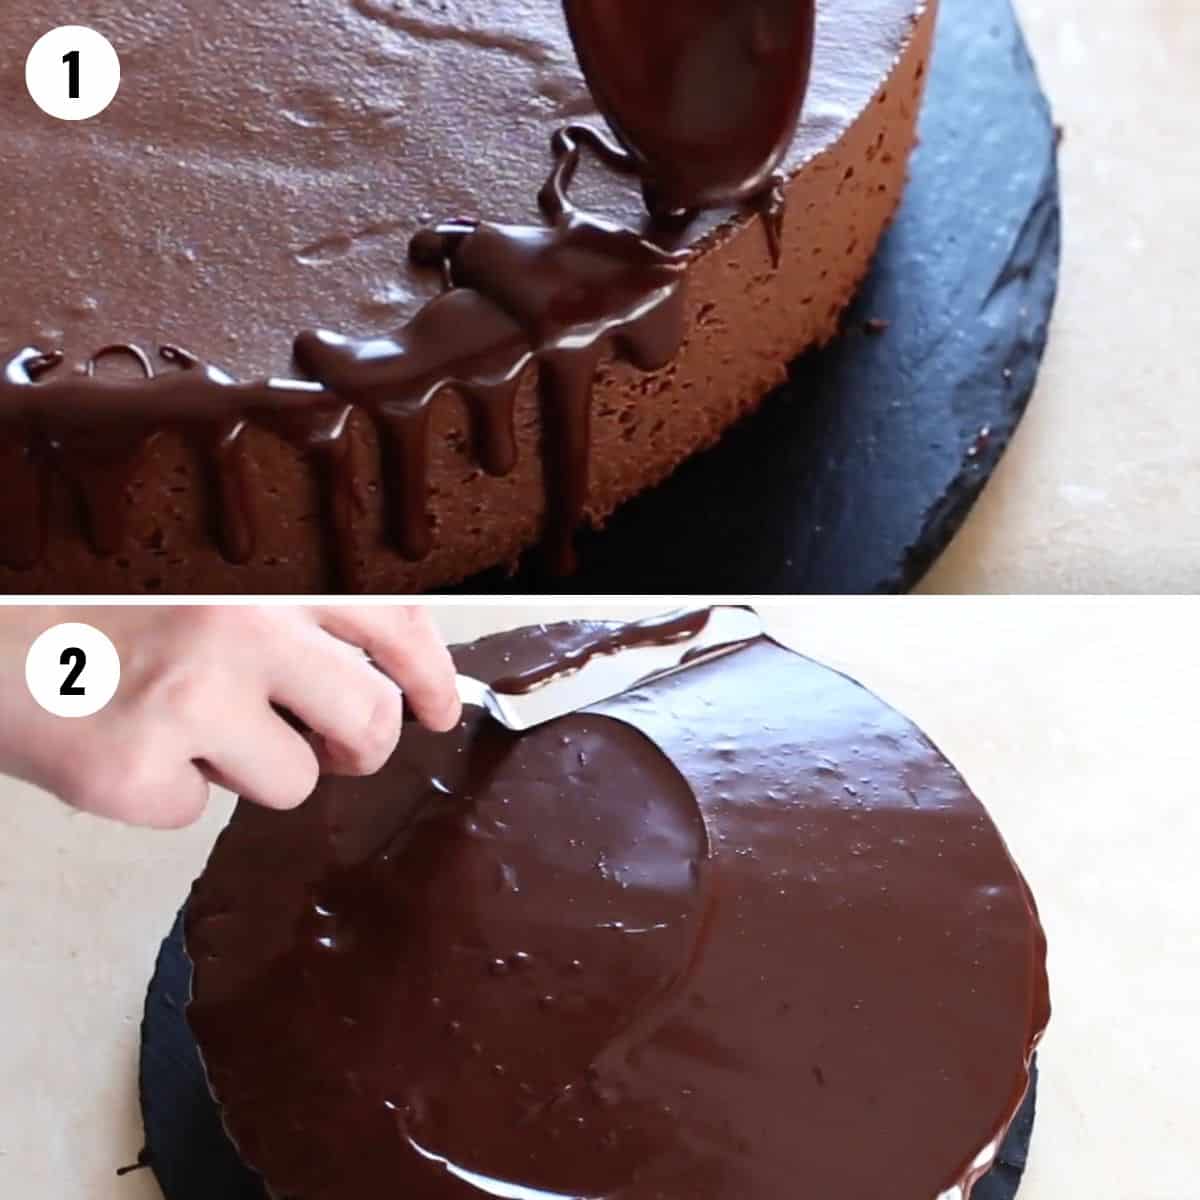 A collage showing how to add the ganache to the chocolate mousse cake.